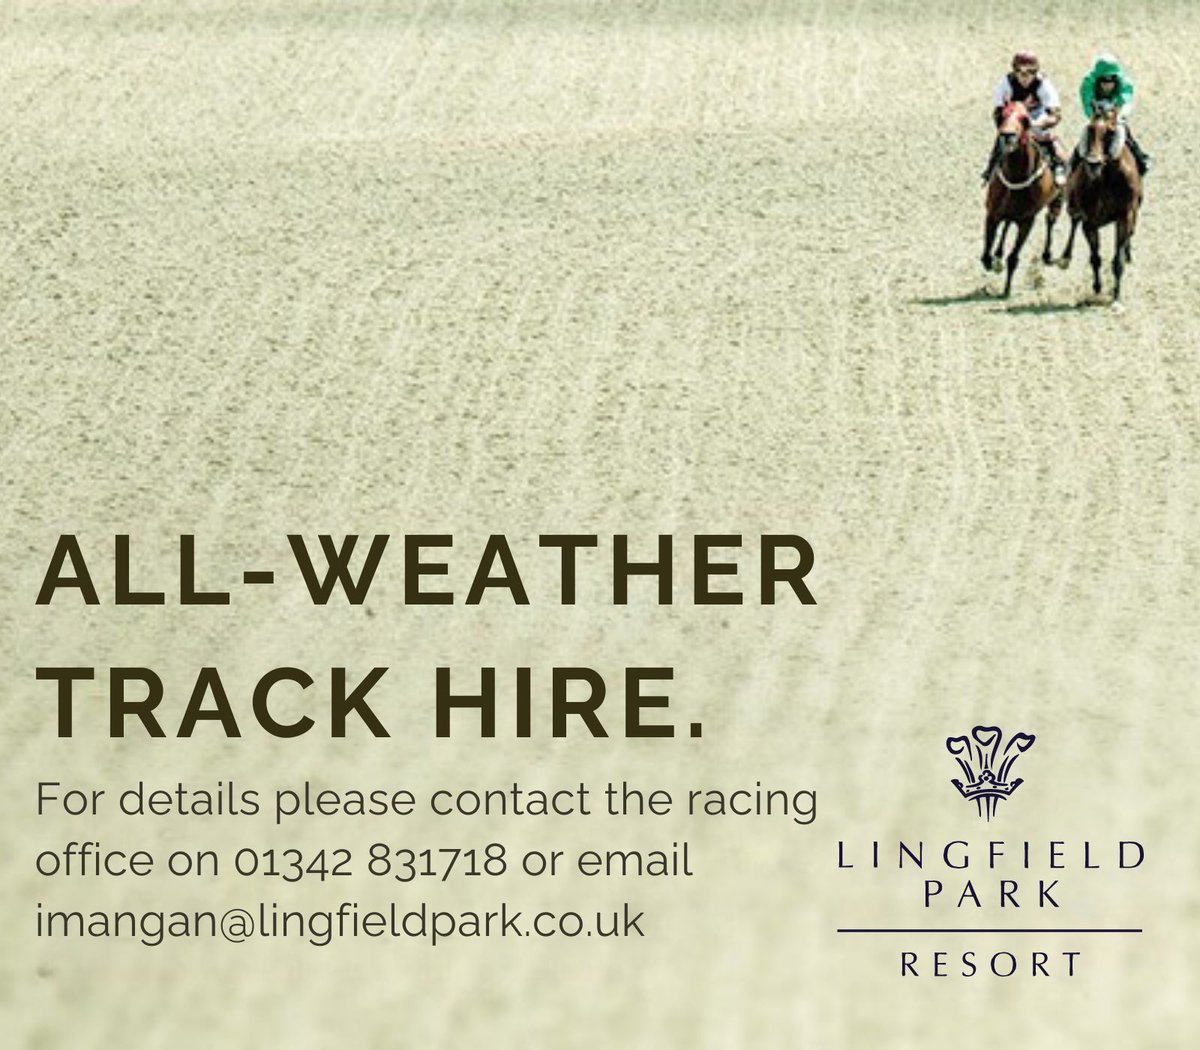 There are still spaces available for our Gallop Morning tomorrow (11th April) at 8:30 & 9:00am. For more details please contact the racing office on 01342 831718 or email imangan@lingfieldpark.co.uk